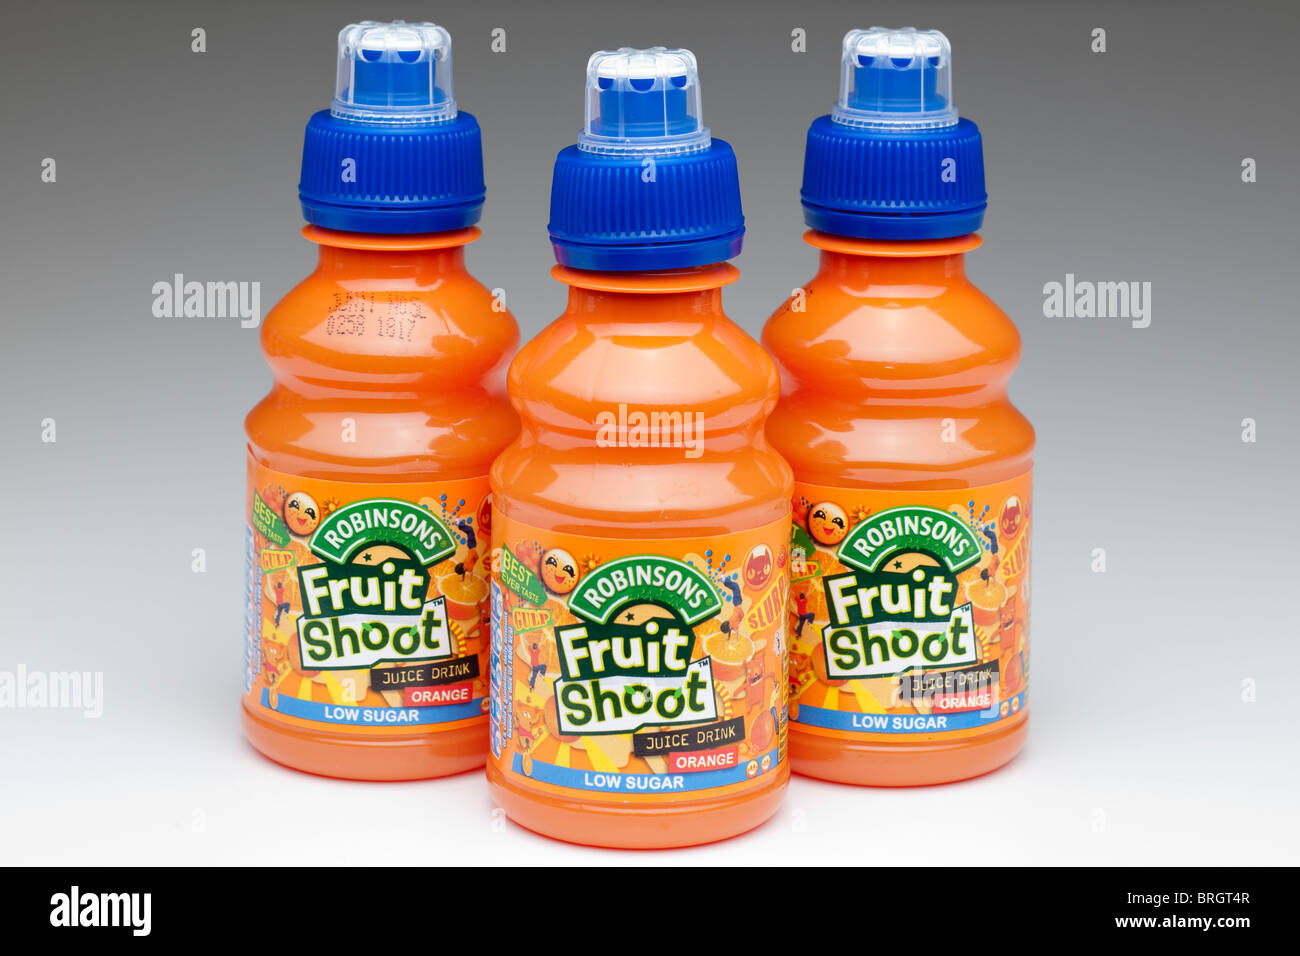 Three plastic bottles of Robinson's Fruit Shoot orange juice drink made from concentrate Stock Photo